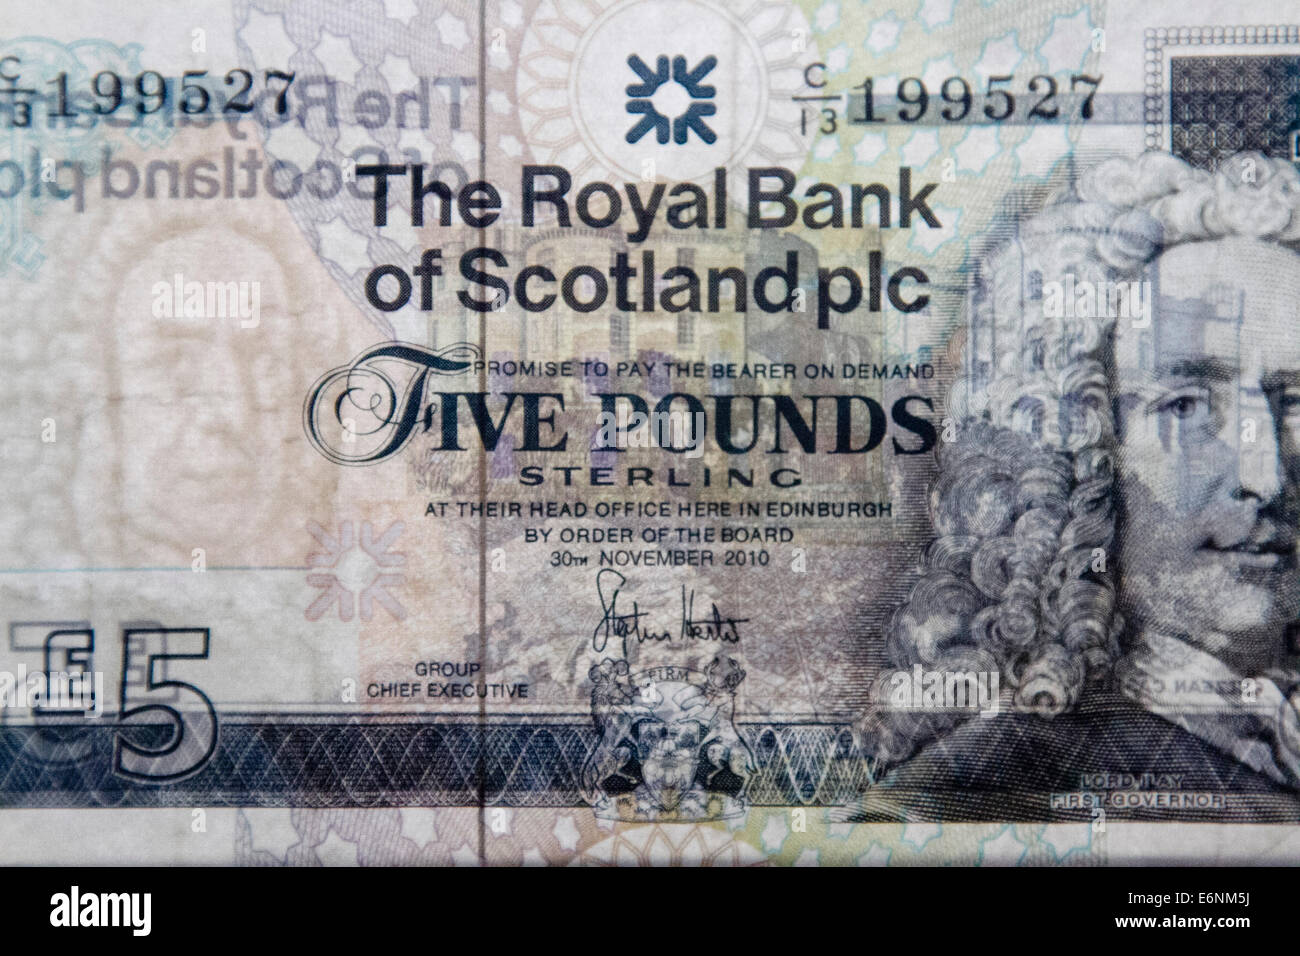 London,UK. 28th August 2014. 3 weeks left until the Scotland referendum on Independence when the Scottish people go to the polls to decide whether to leave or remain as part of the United Kingdom. The future of a new Scottish currency in the event of a yes vote has not been decided Stock Photo